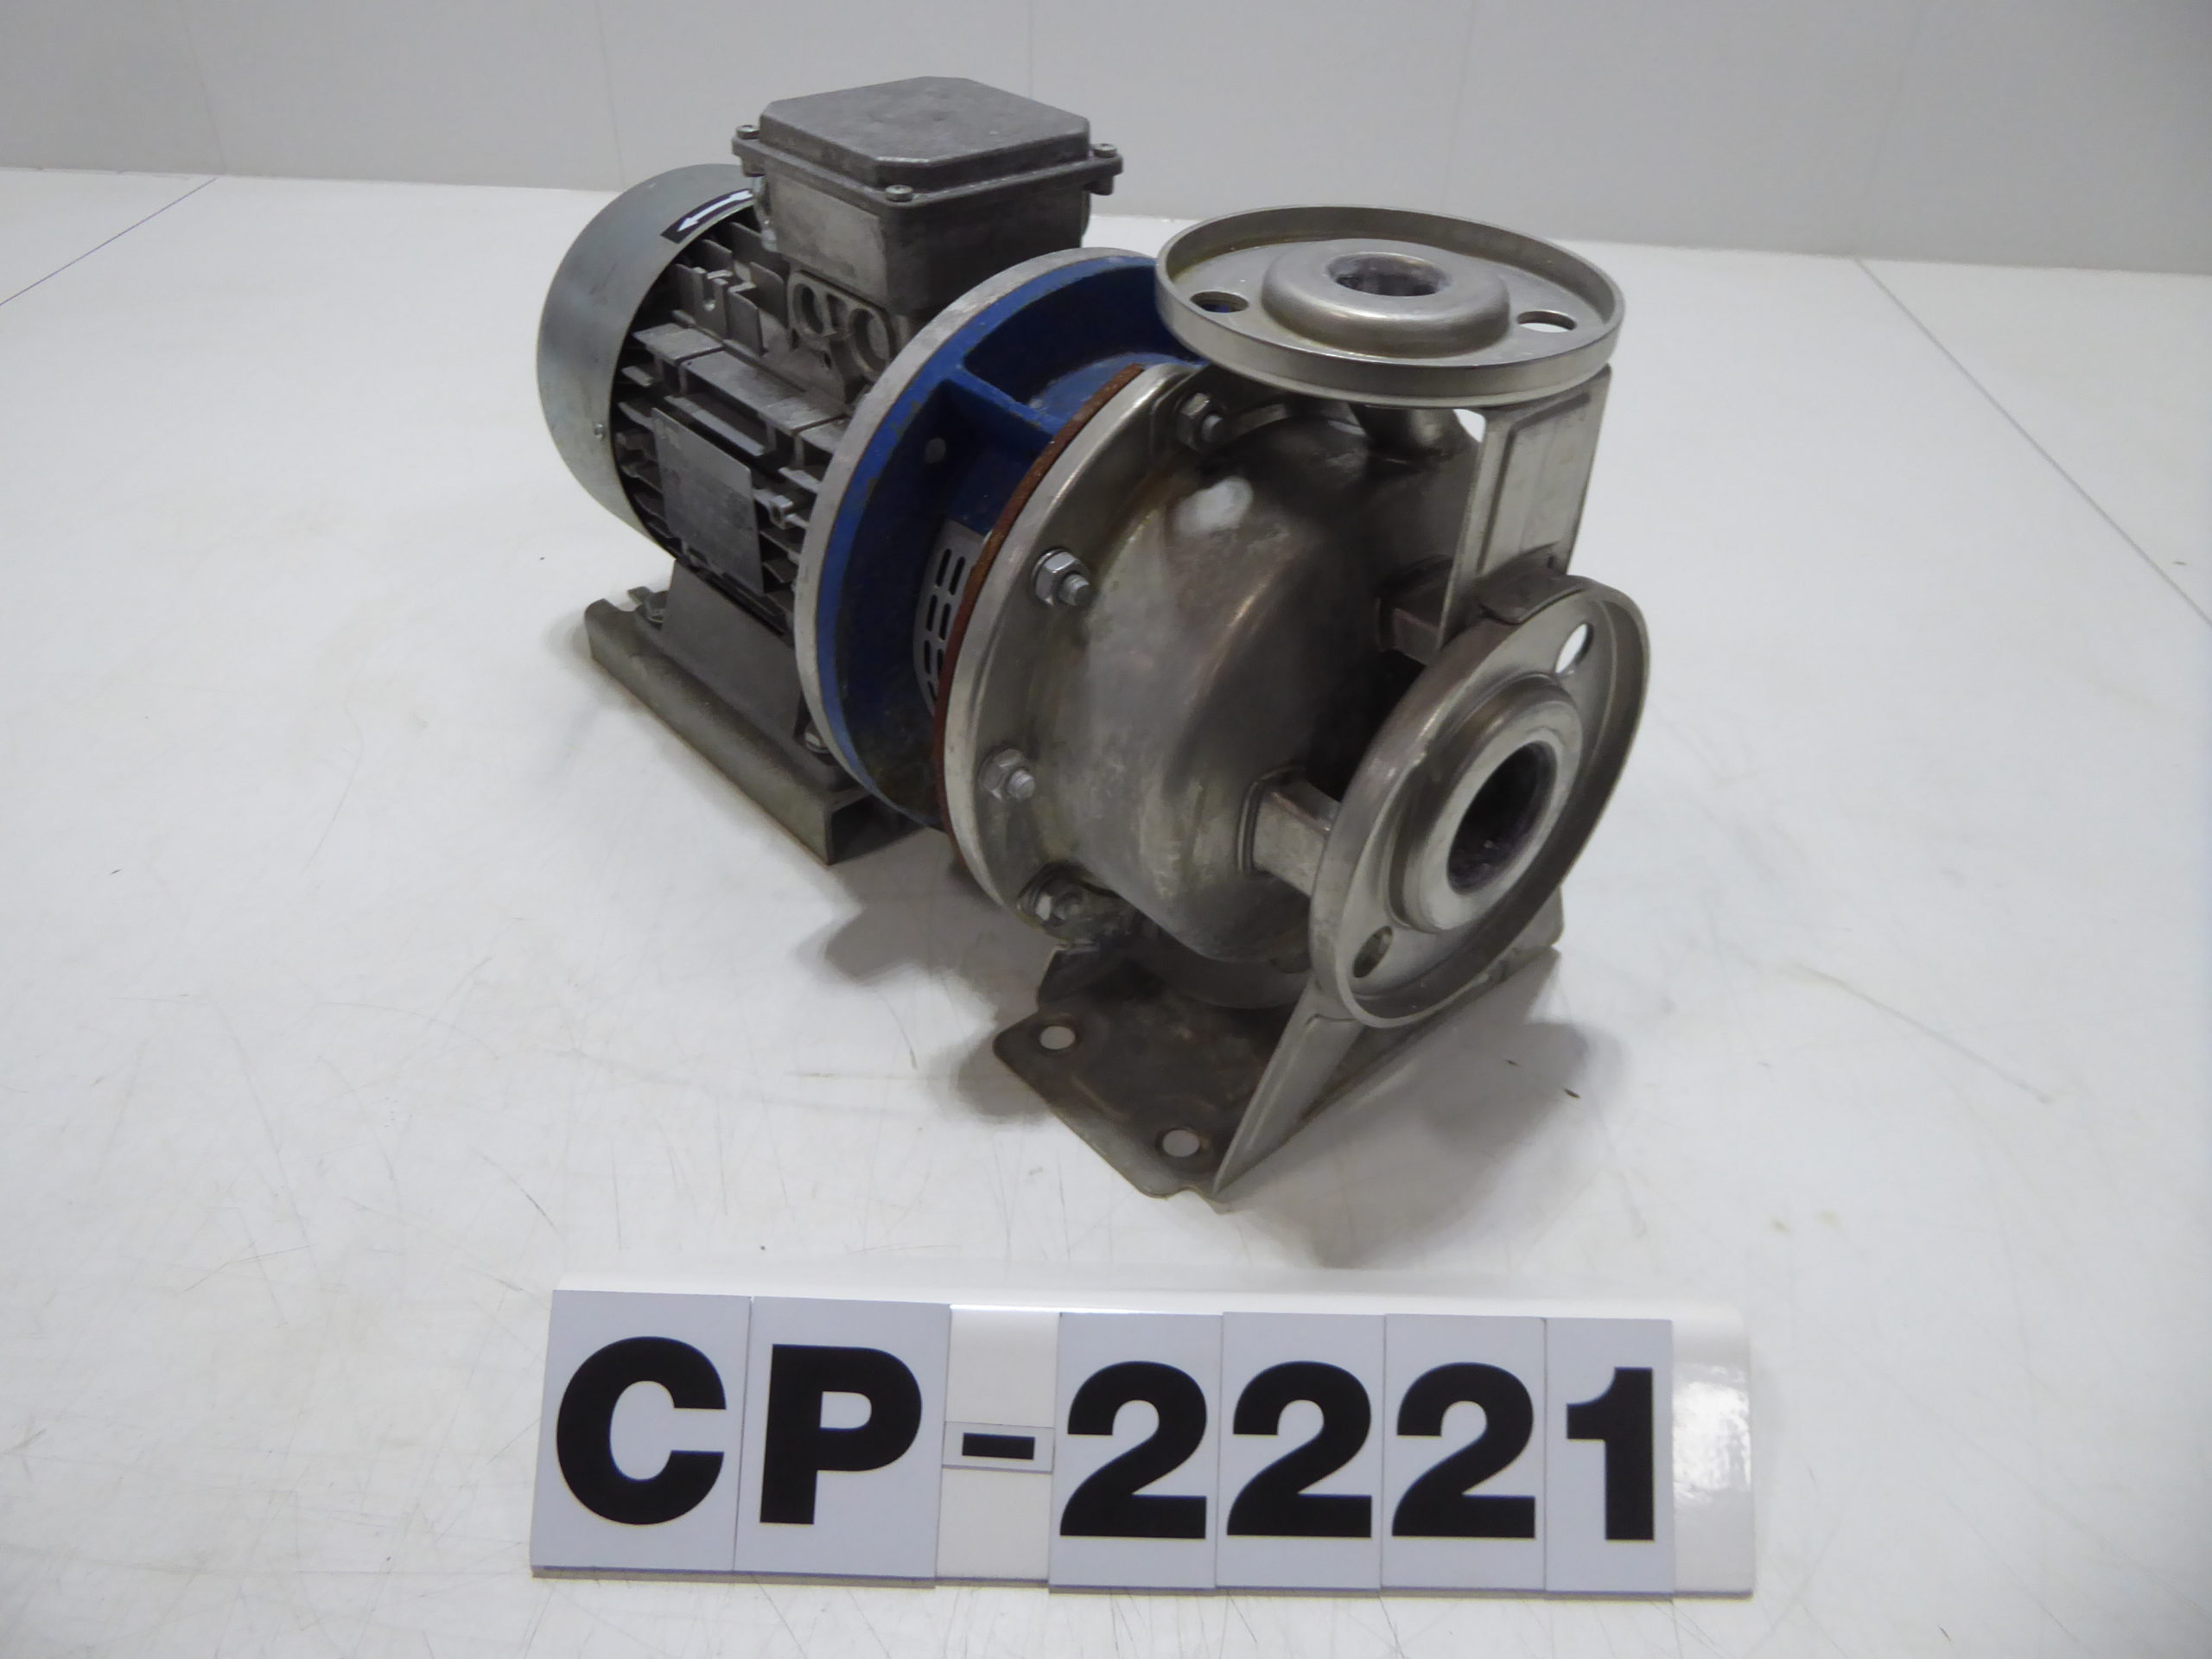 Used Centrifugal Pump - Asynchronous 4 HP 2" Inlet 1"Outlet Centrifugal CP2221-Pumps - Centrifugal